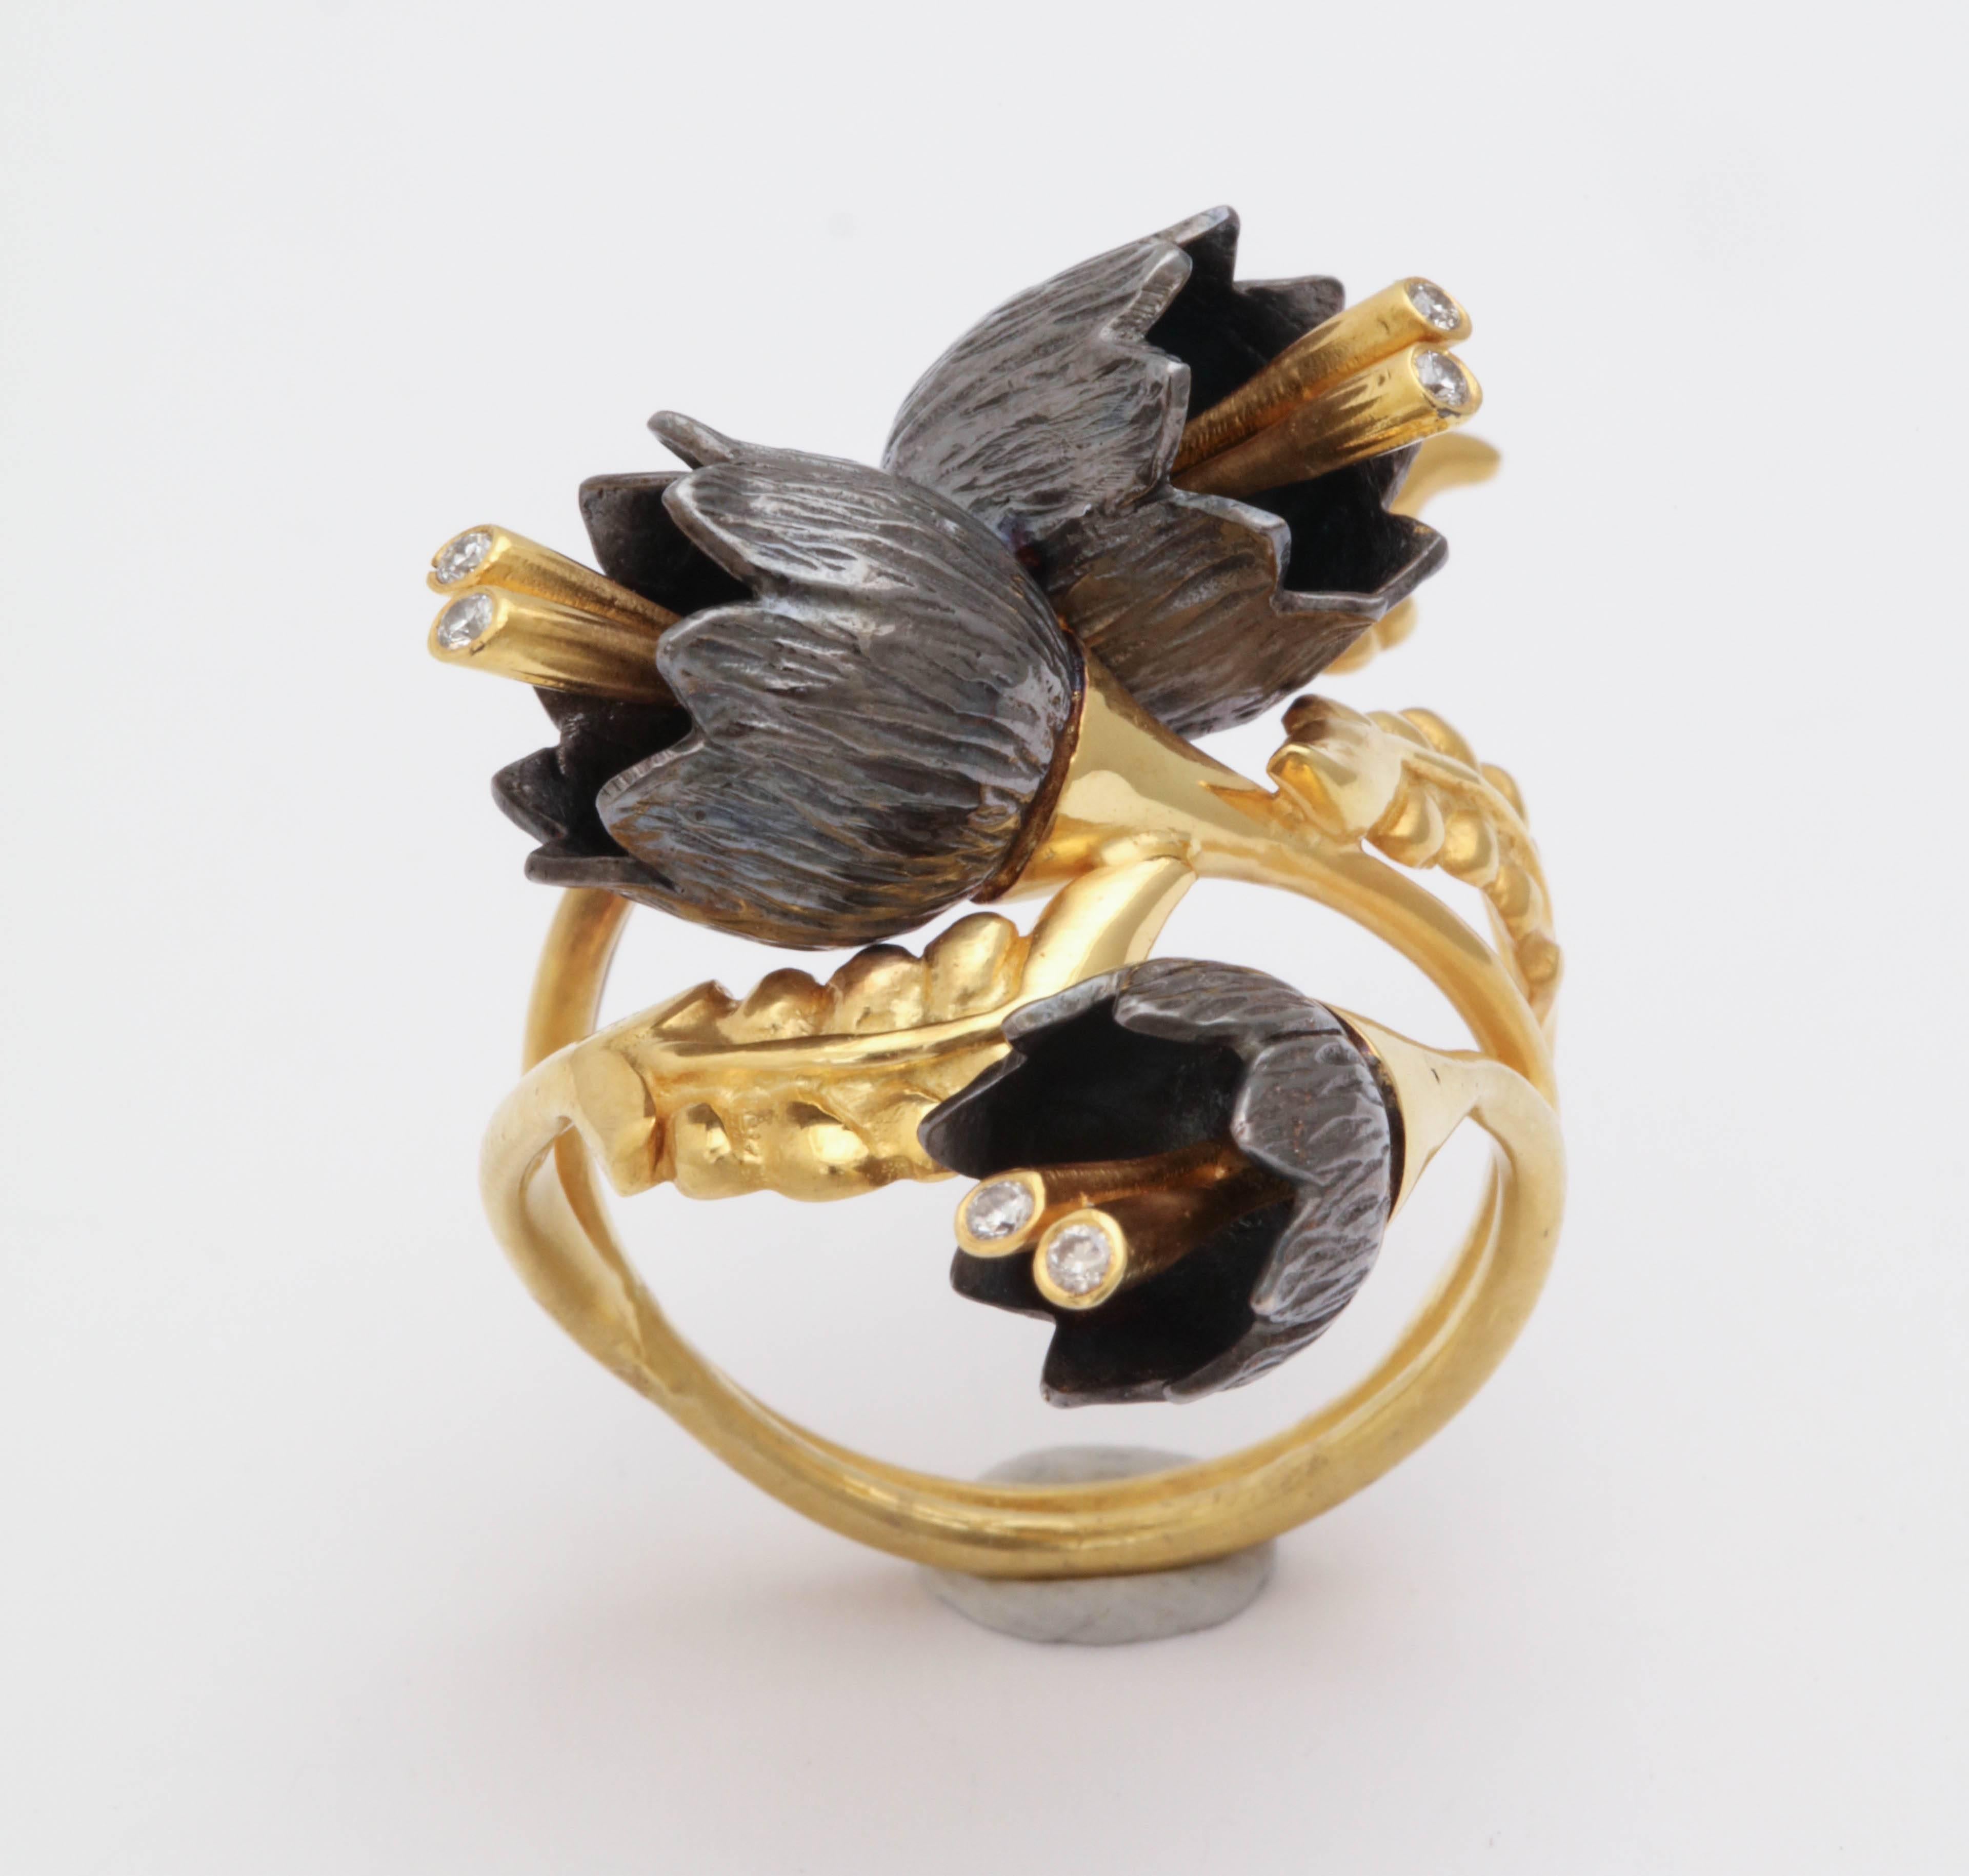 A lily of the valley ring composed of 18kt yellow gold leaves and three rhodium plated sterling silver lily of the valley flowers. The flowers cascade down an 18kt yellow gold vine. Each flower has 18kt yellow gold stamen set with diamonds. Size